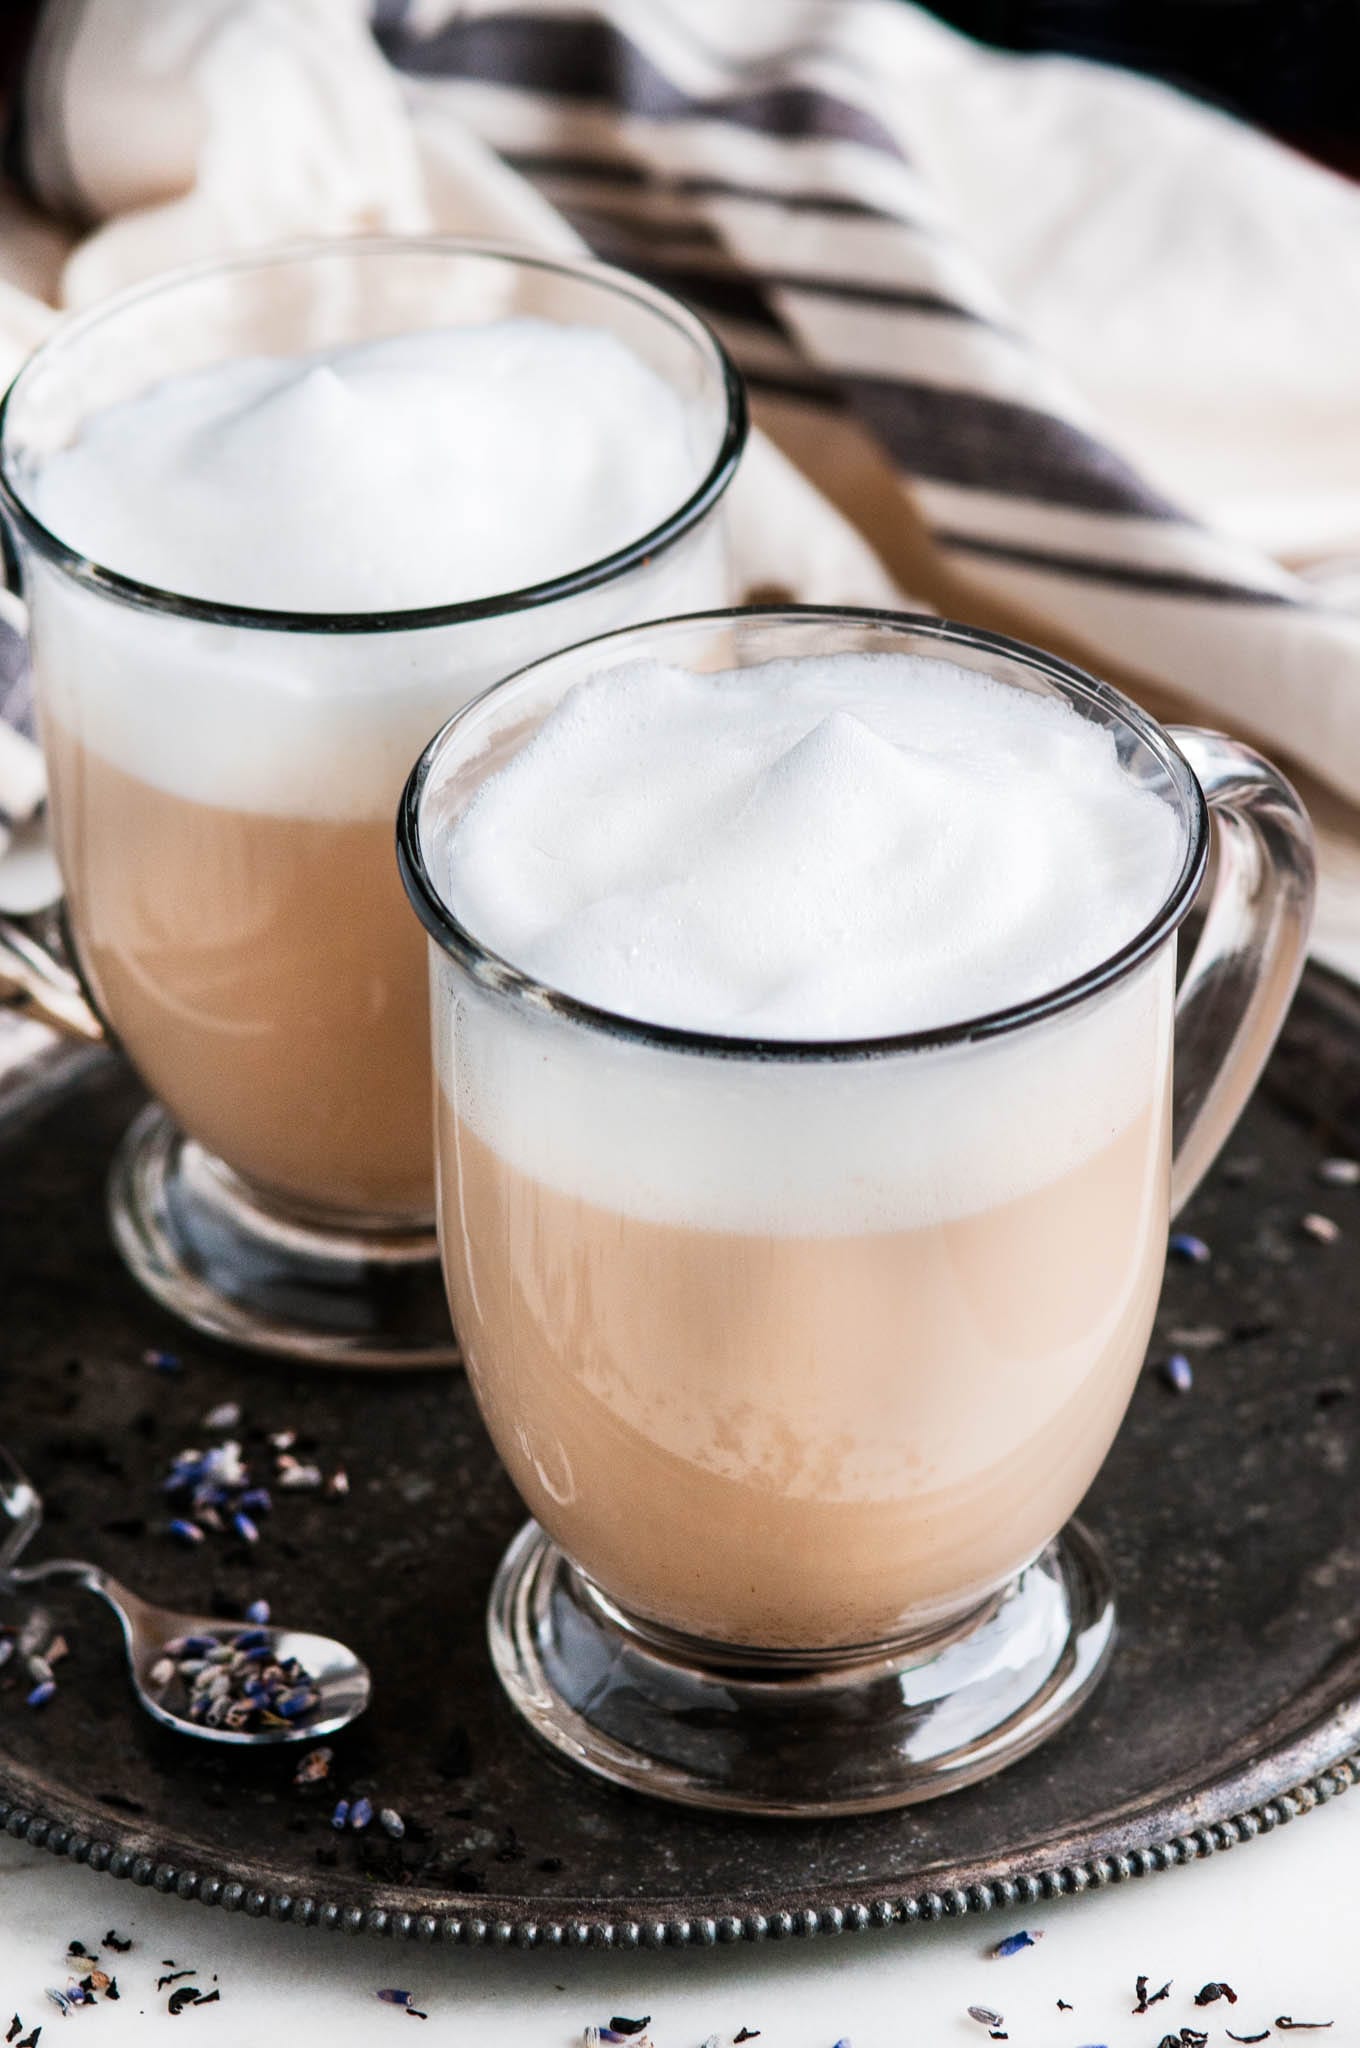 Be A Barista At Home With These 3-Step Coffee Recipes